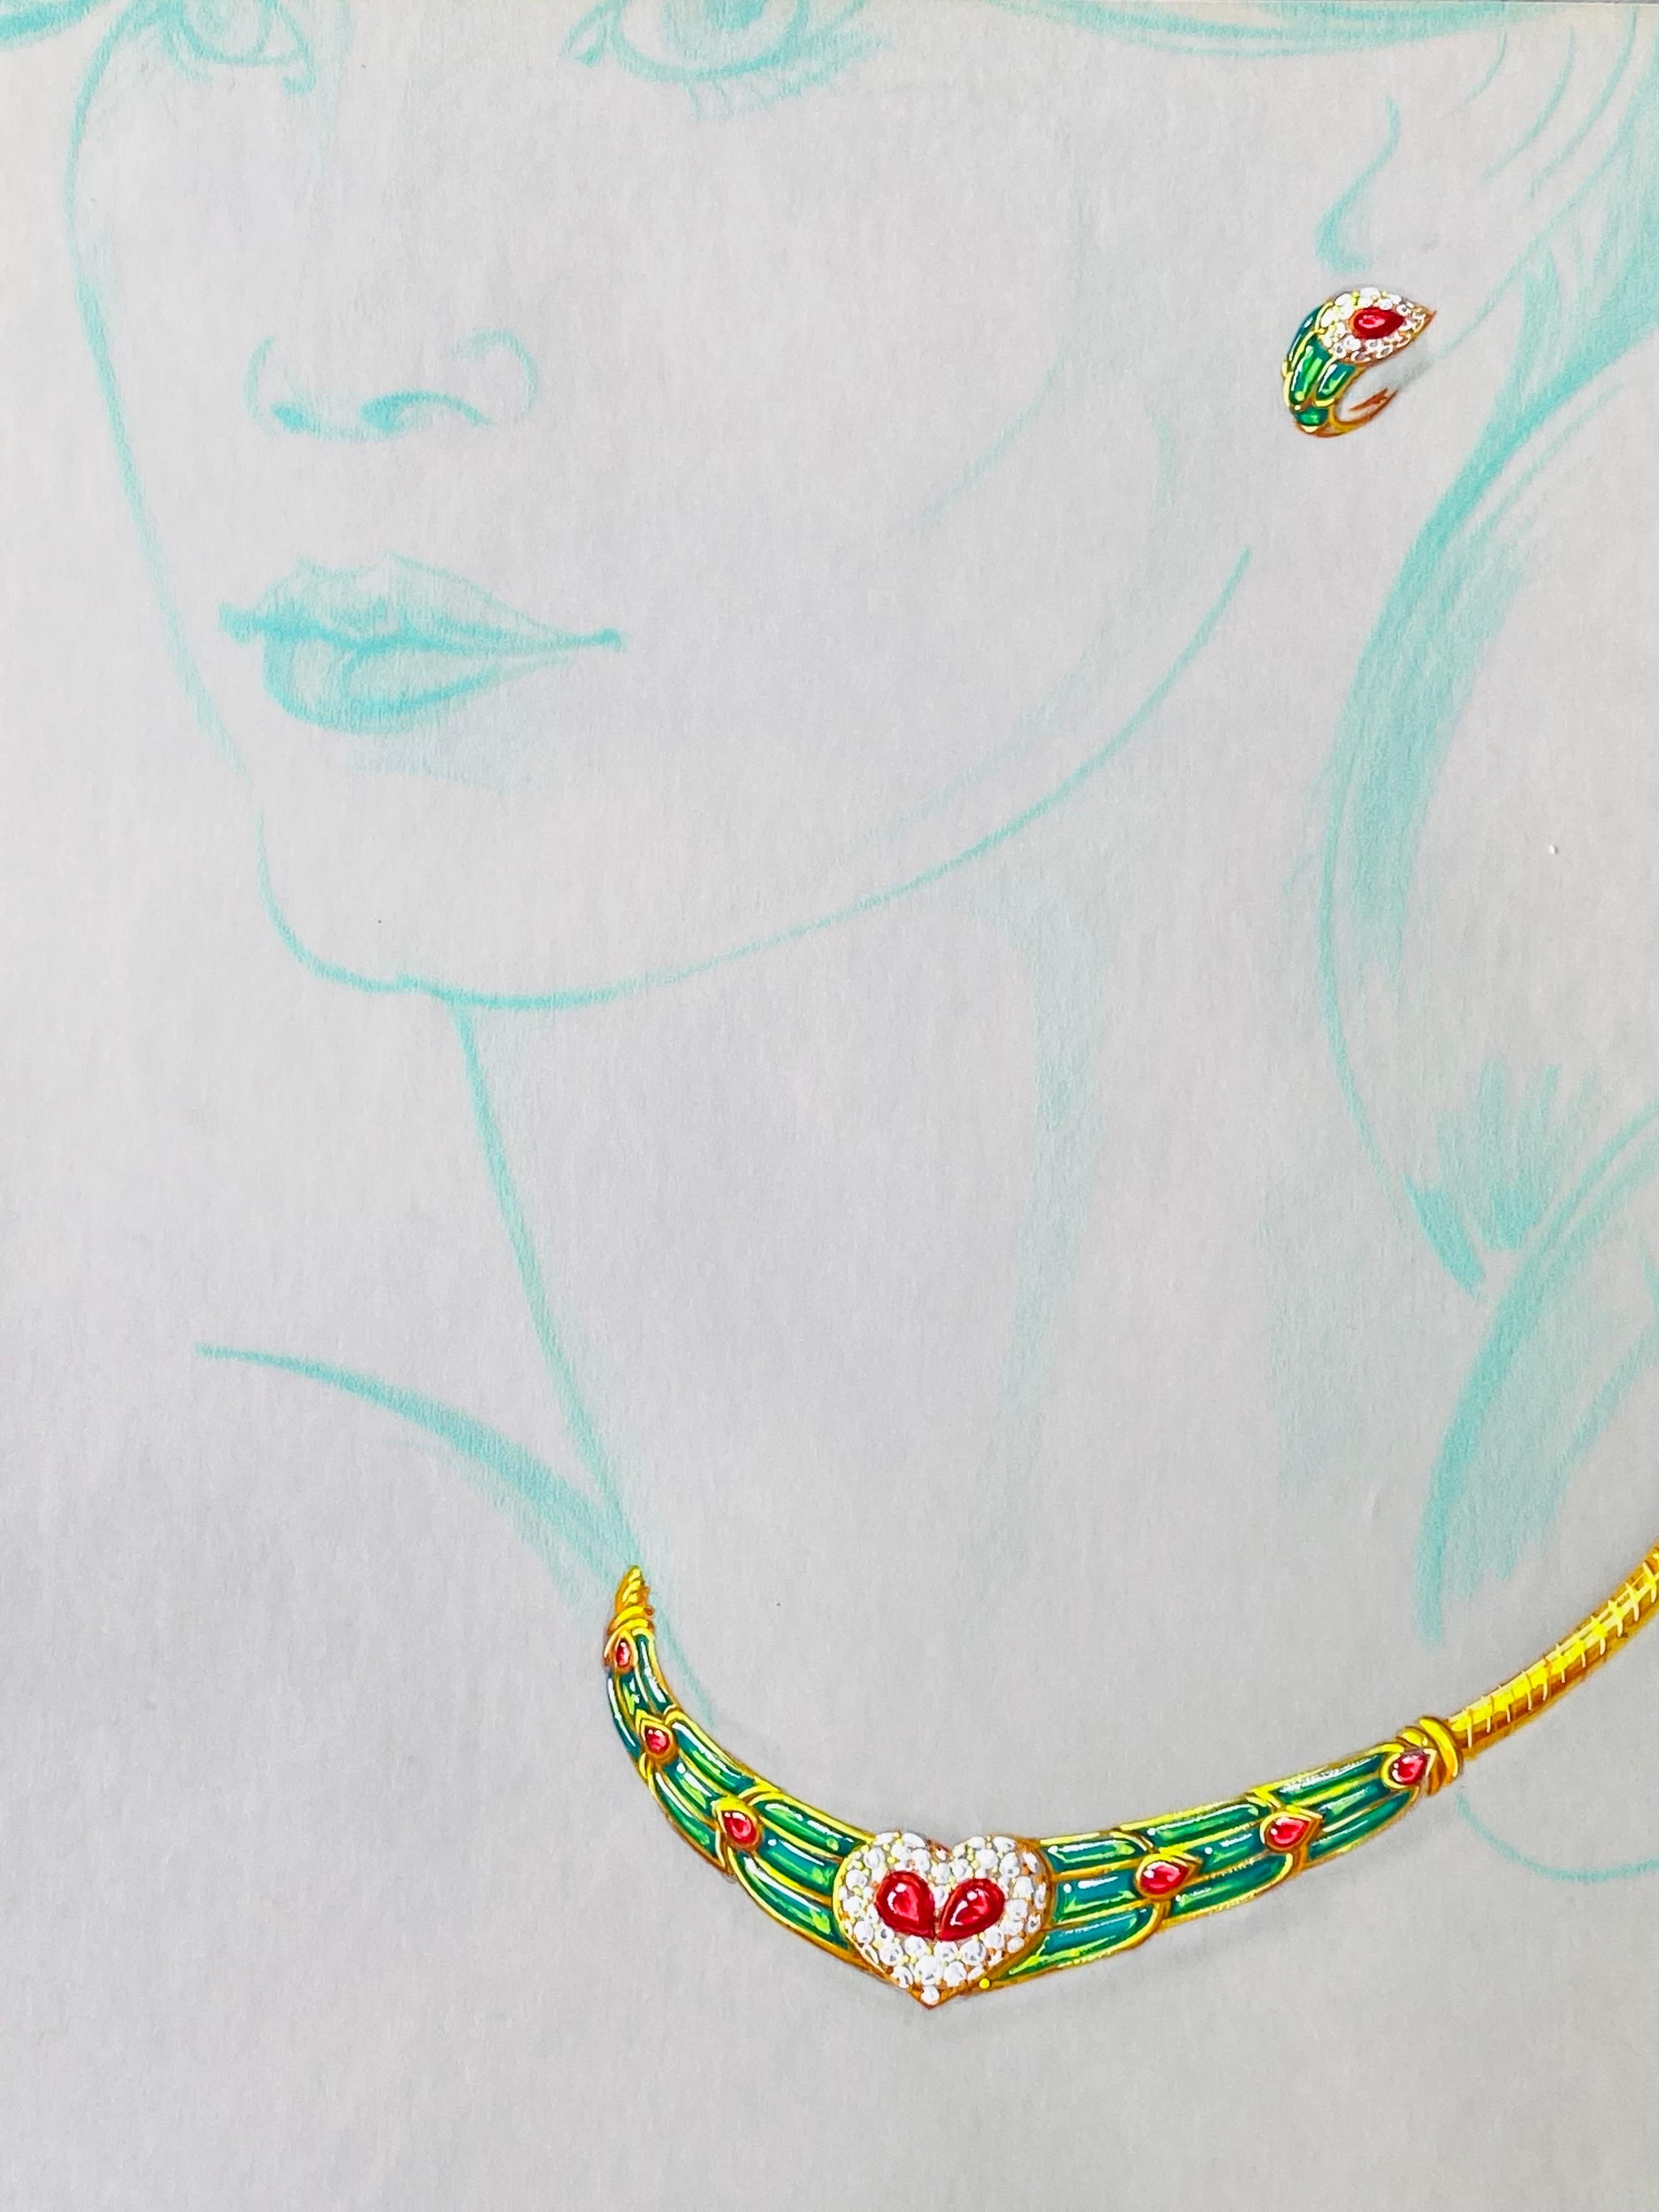 Sketch for a jewel set - necklace and earrings - Van Cleef Bulgari Cartier Ruby - Art by Philippe Deloison